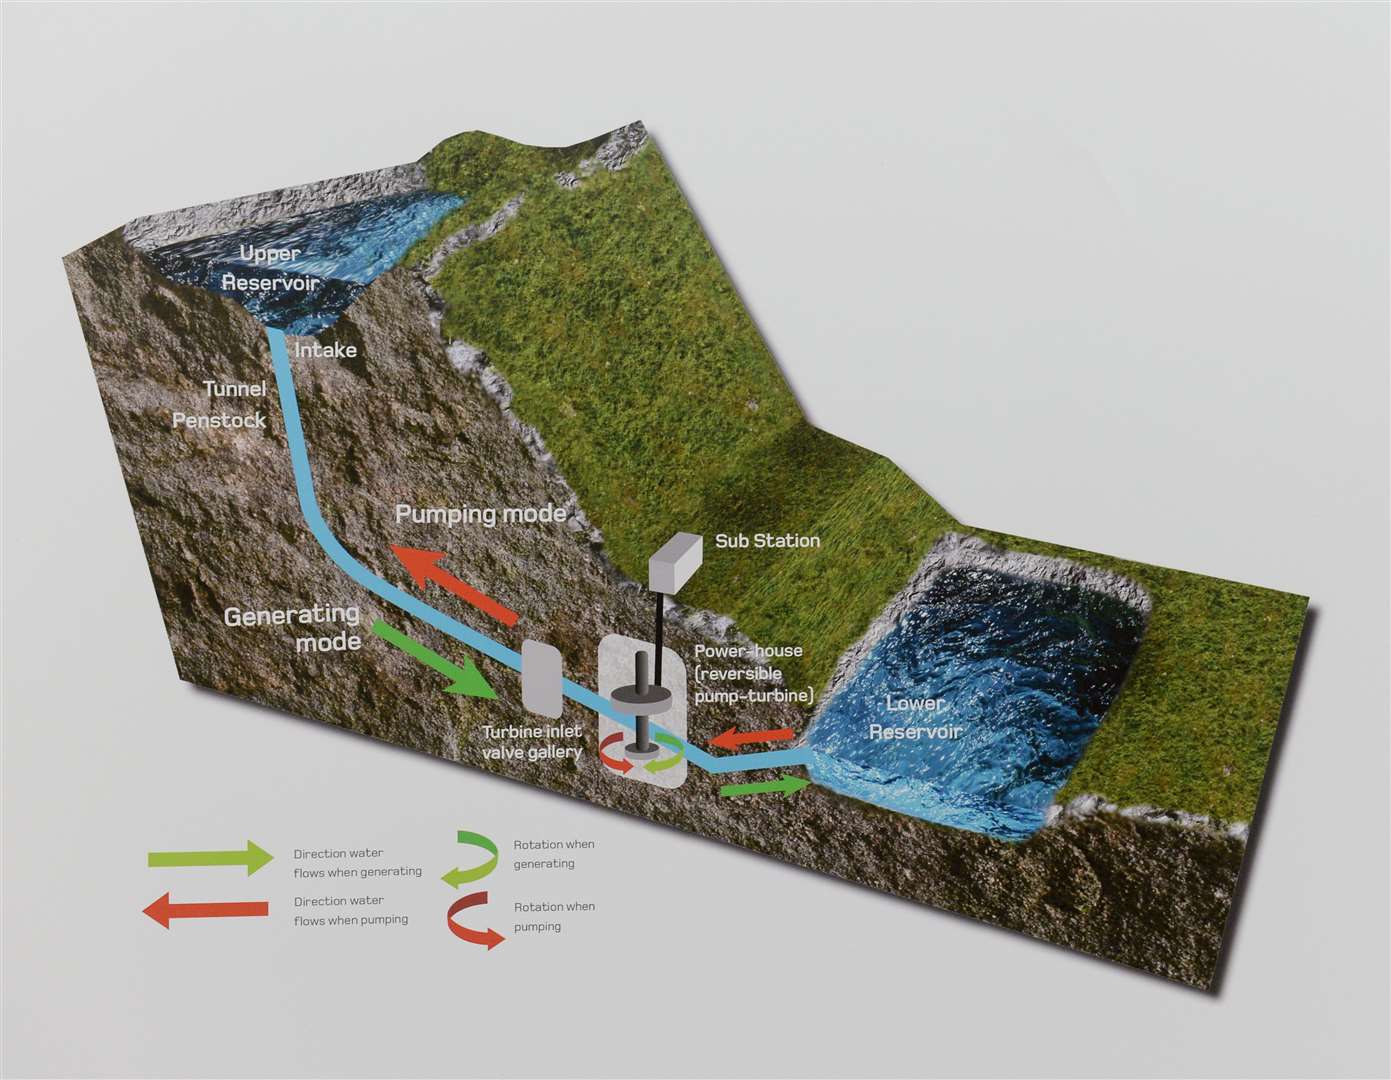 The ILI Red John Pumped Storage Hydro project is nominated in the sustainable development category.